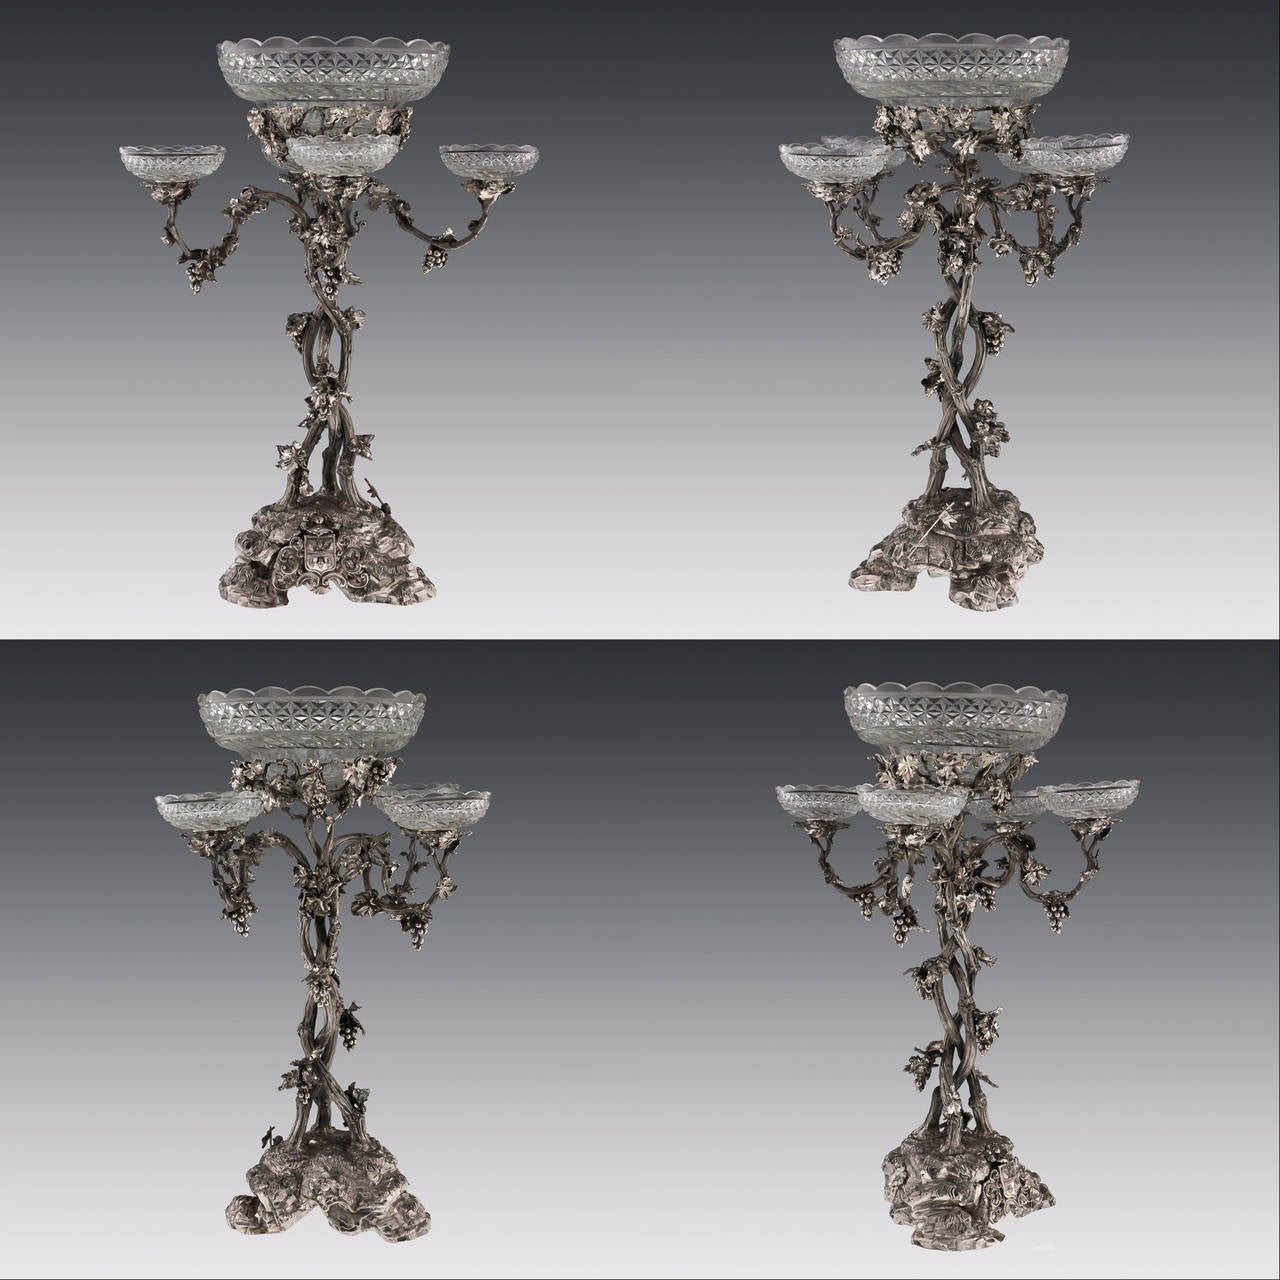 Antique mid-19th Century rare and magnificent Victorian Solid Silver three-piece table garniture / candelabra centerpiece, composing of three massive four-light candelabra.

The central one is surmounted by a cut-glass bowl and the detachable